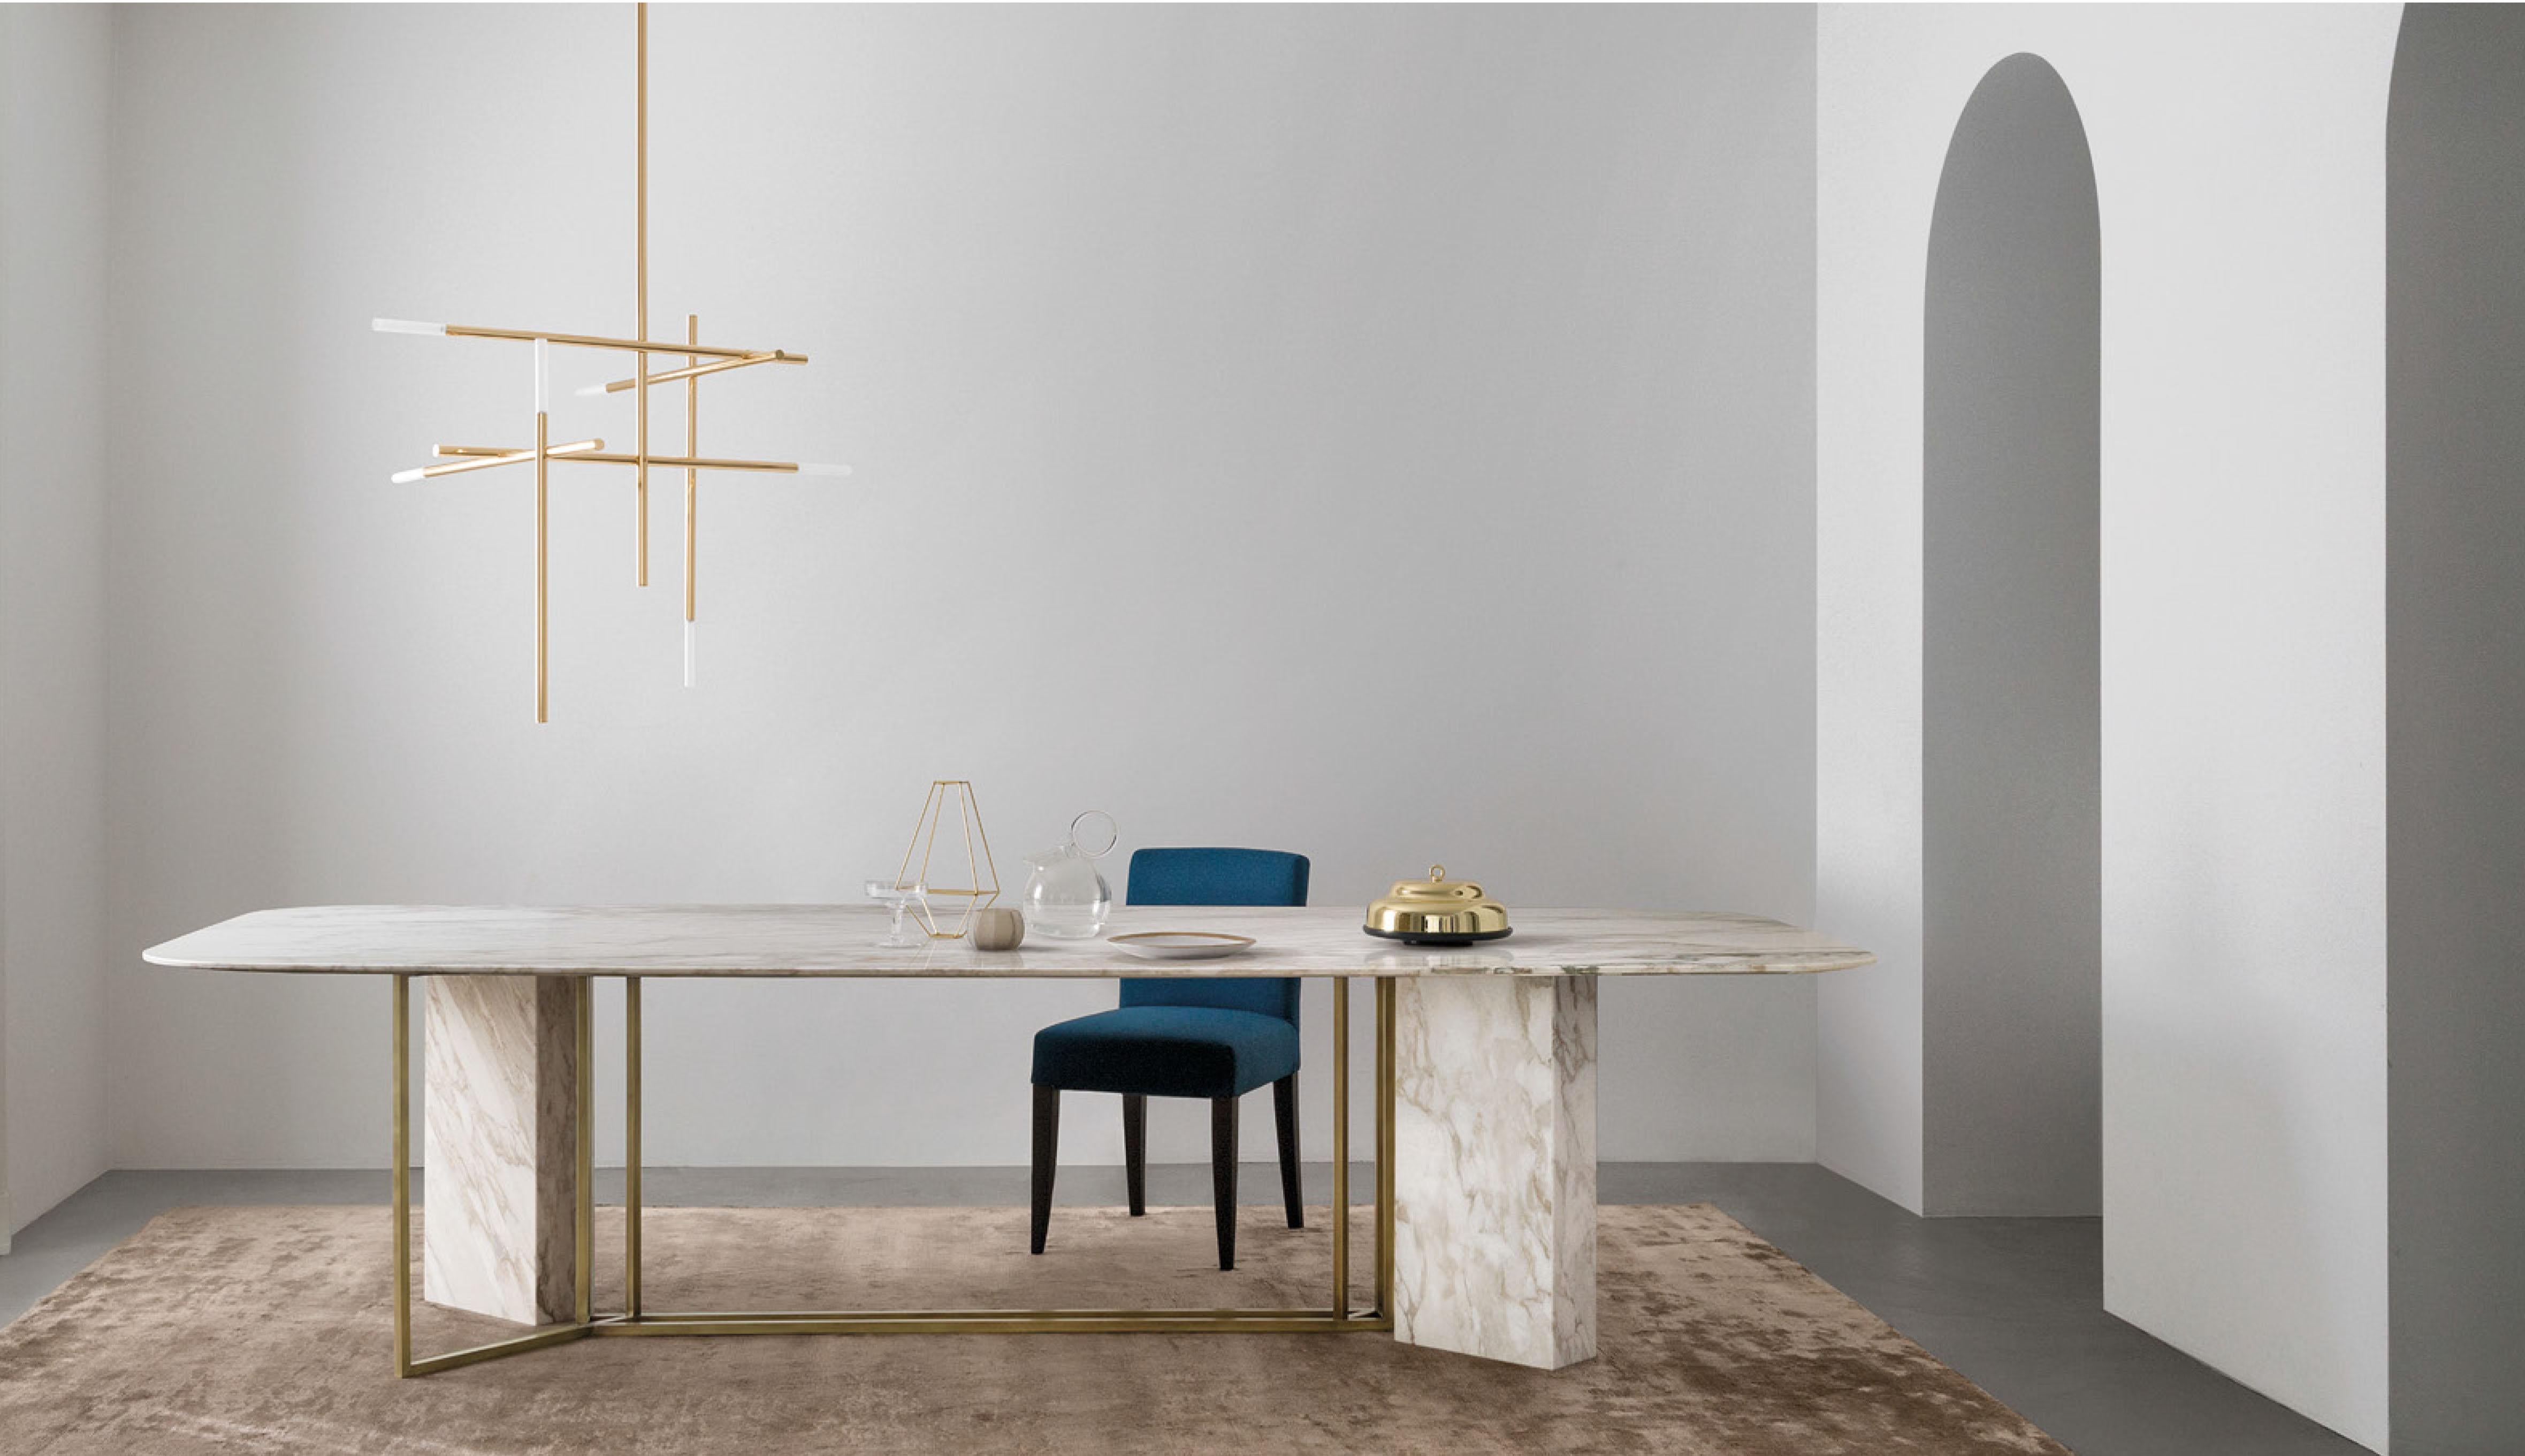 Suspended lamp with diffused light. Polished or matte black nickel, polished gold or light burnished brass structure and satinated glass diffusers. 
Specifications: 
Function: Suspension 
Location: Interior 
Light Emission: Diffused light